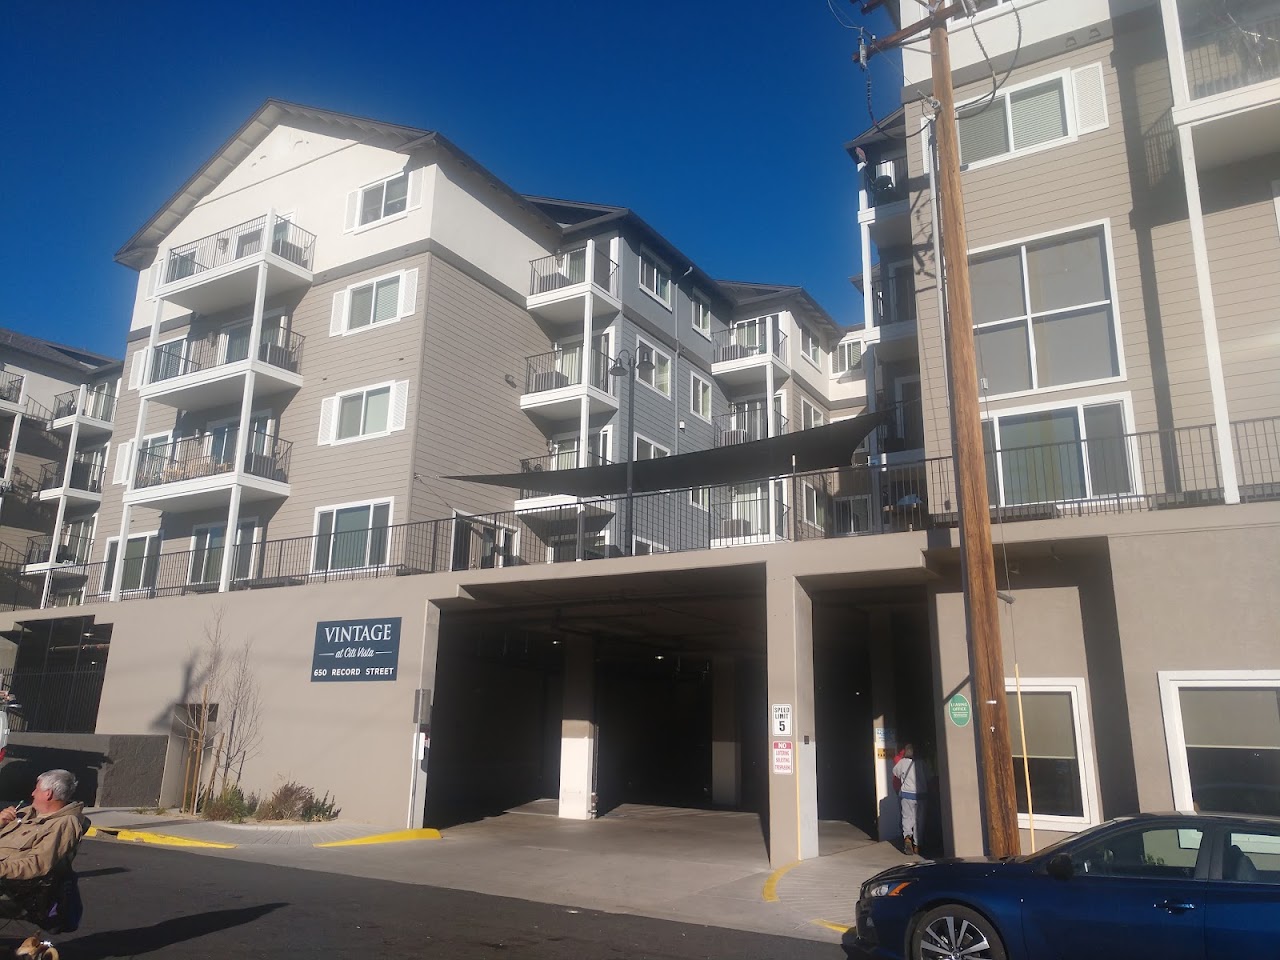 Photo of VINTAGE HILLS SENIOR APARTMENTS. Affordable housing located at 4195 W. 7TH STREET RENO, NV 89503